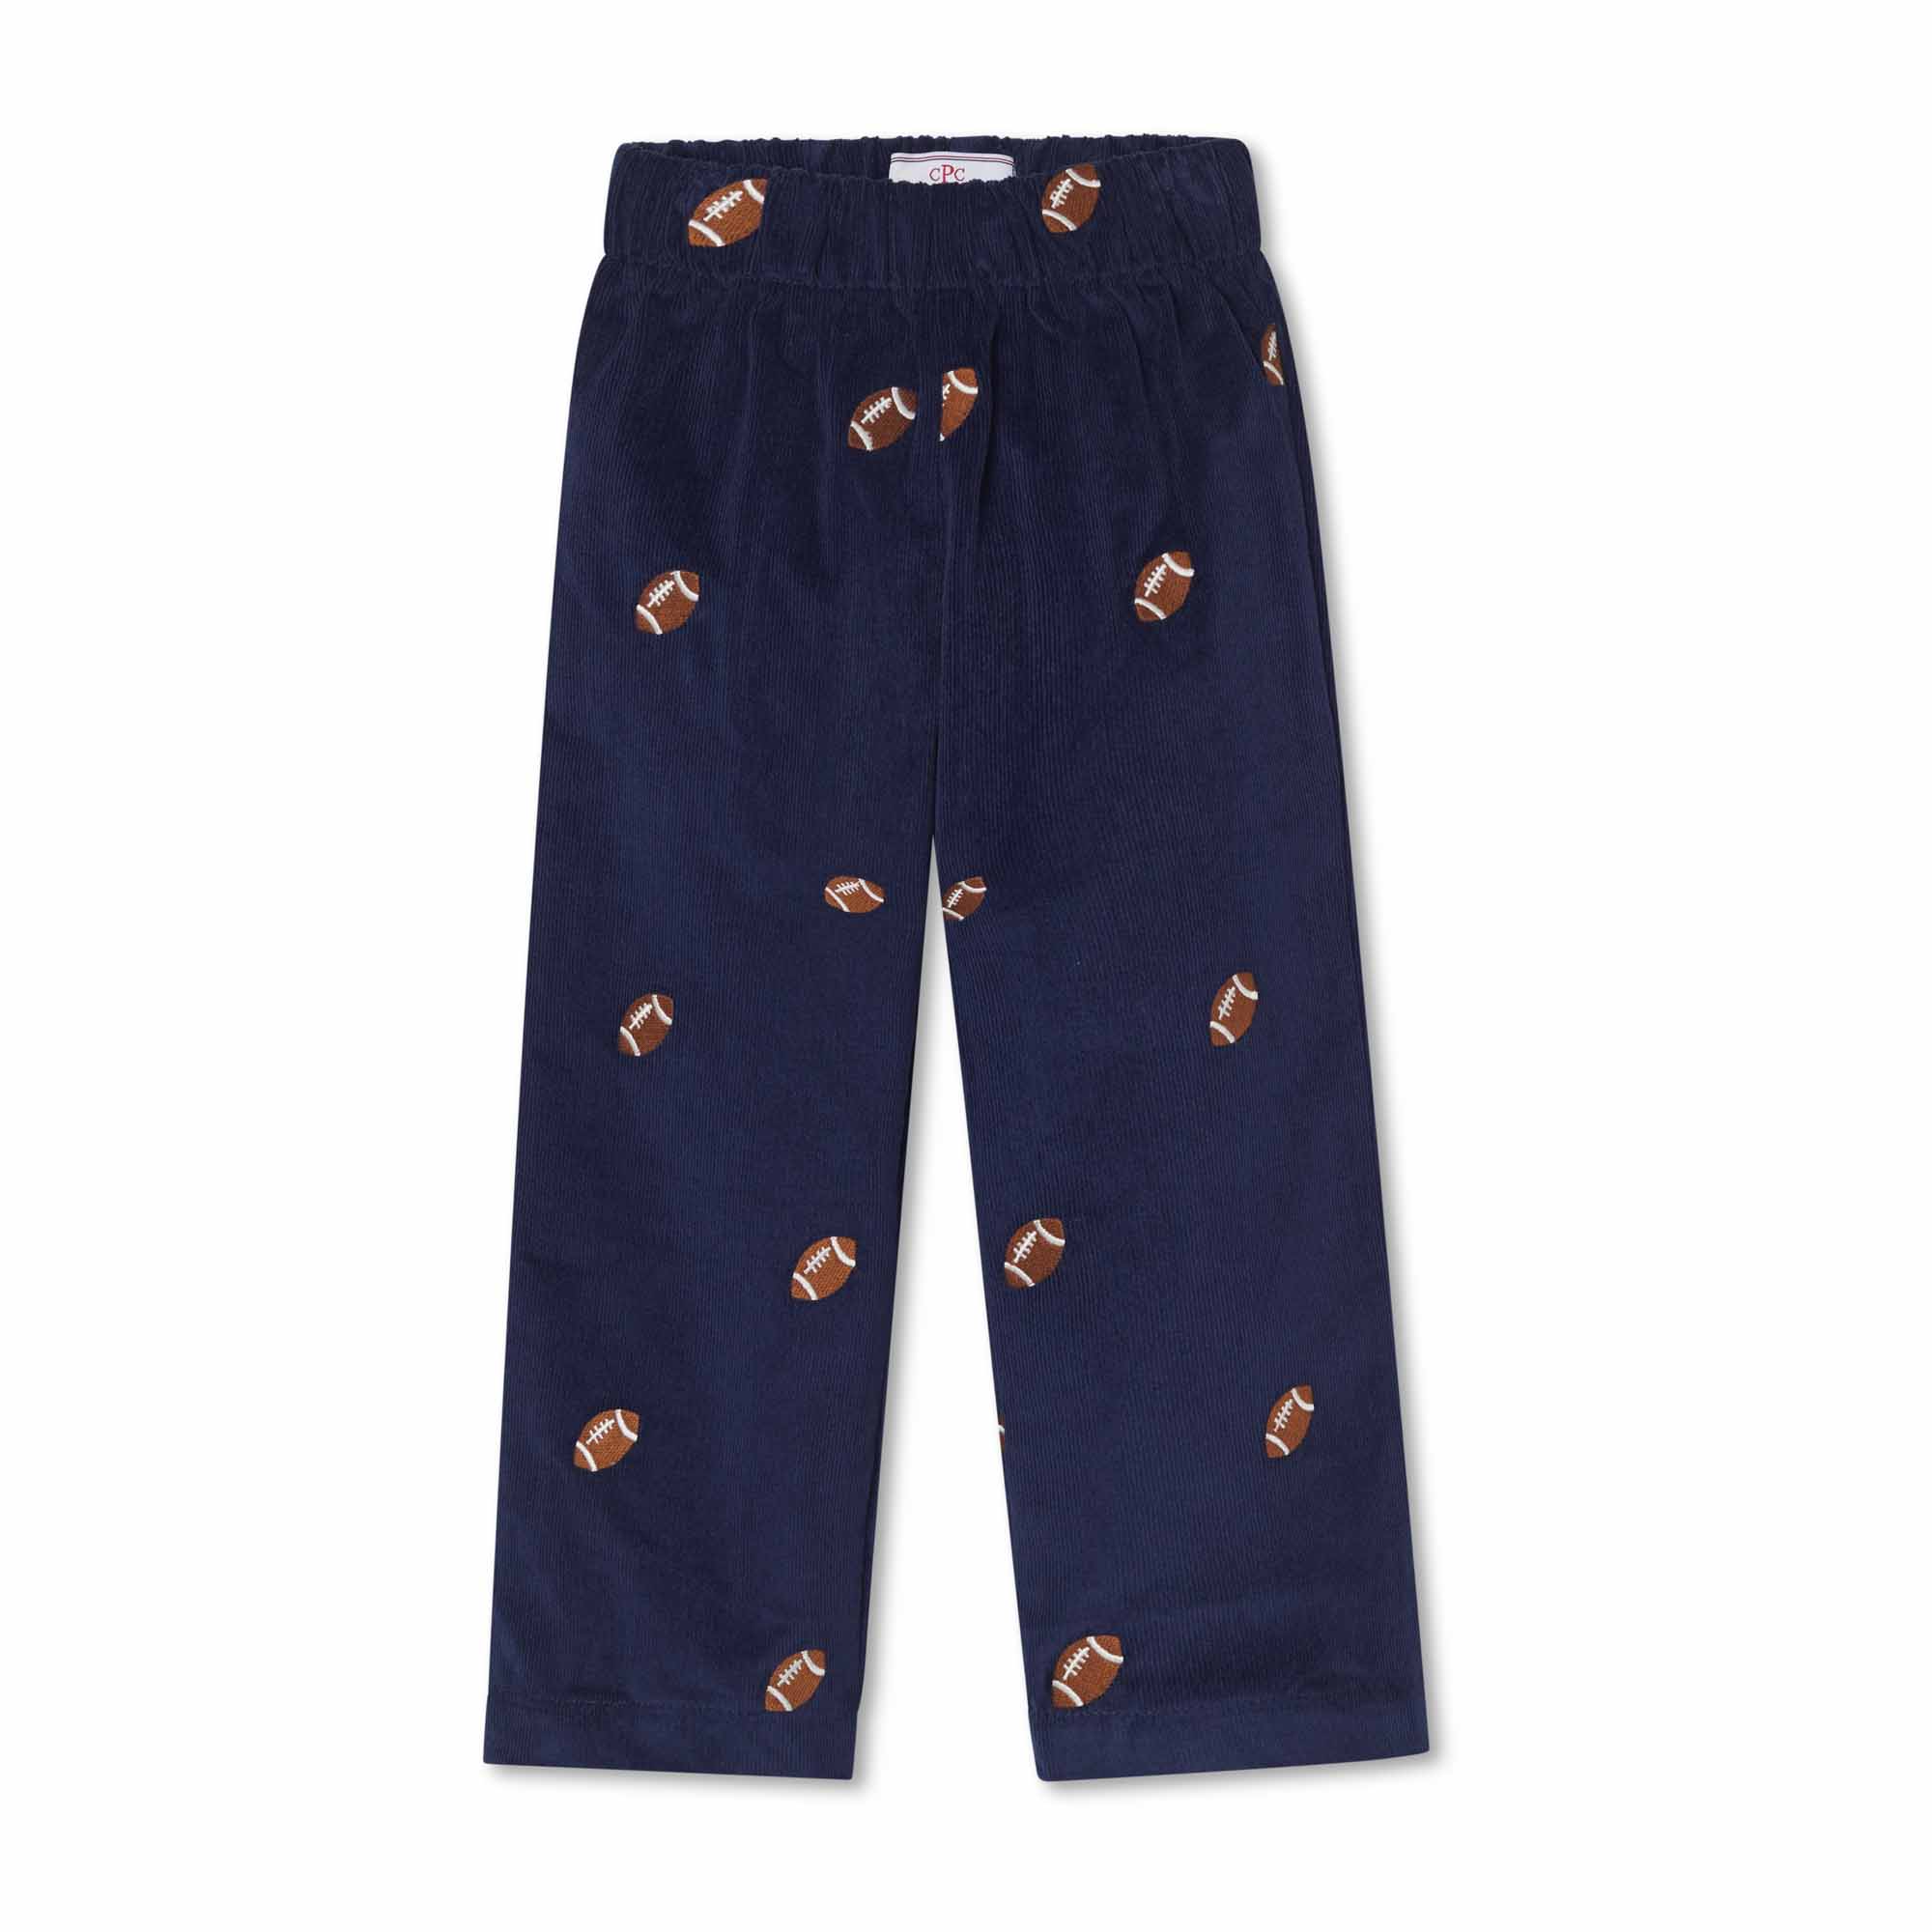 Myles Pant, Medieval Blue Cord with Footballs